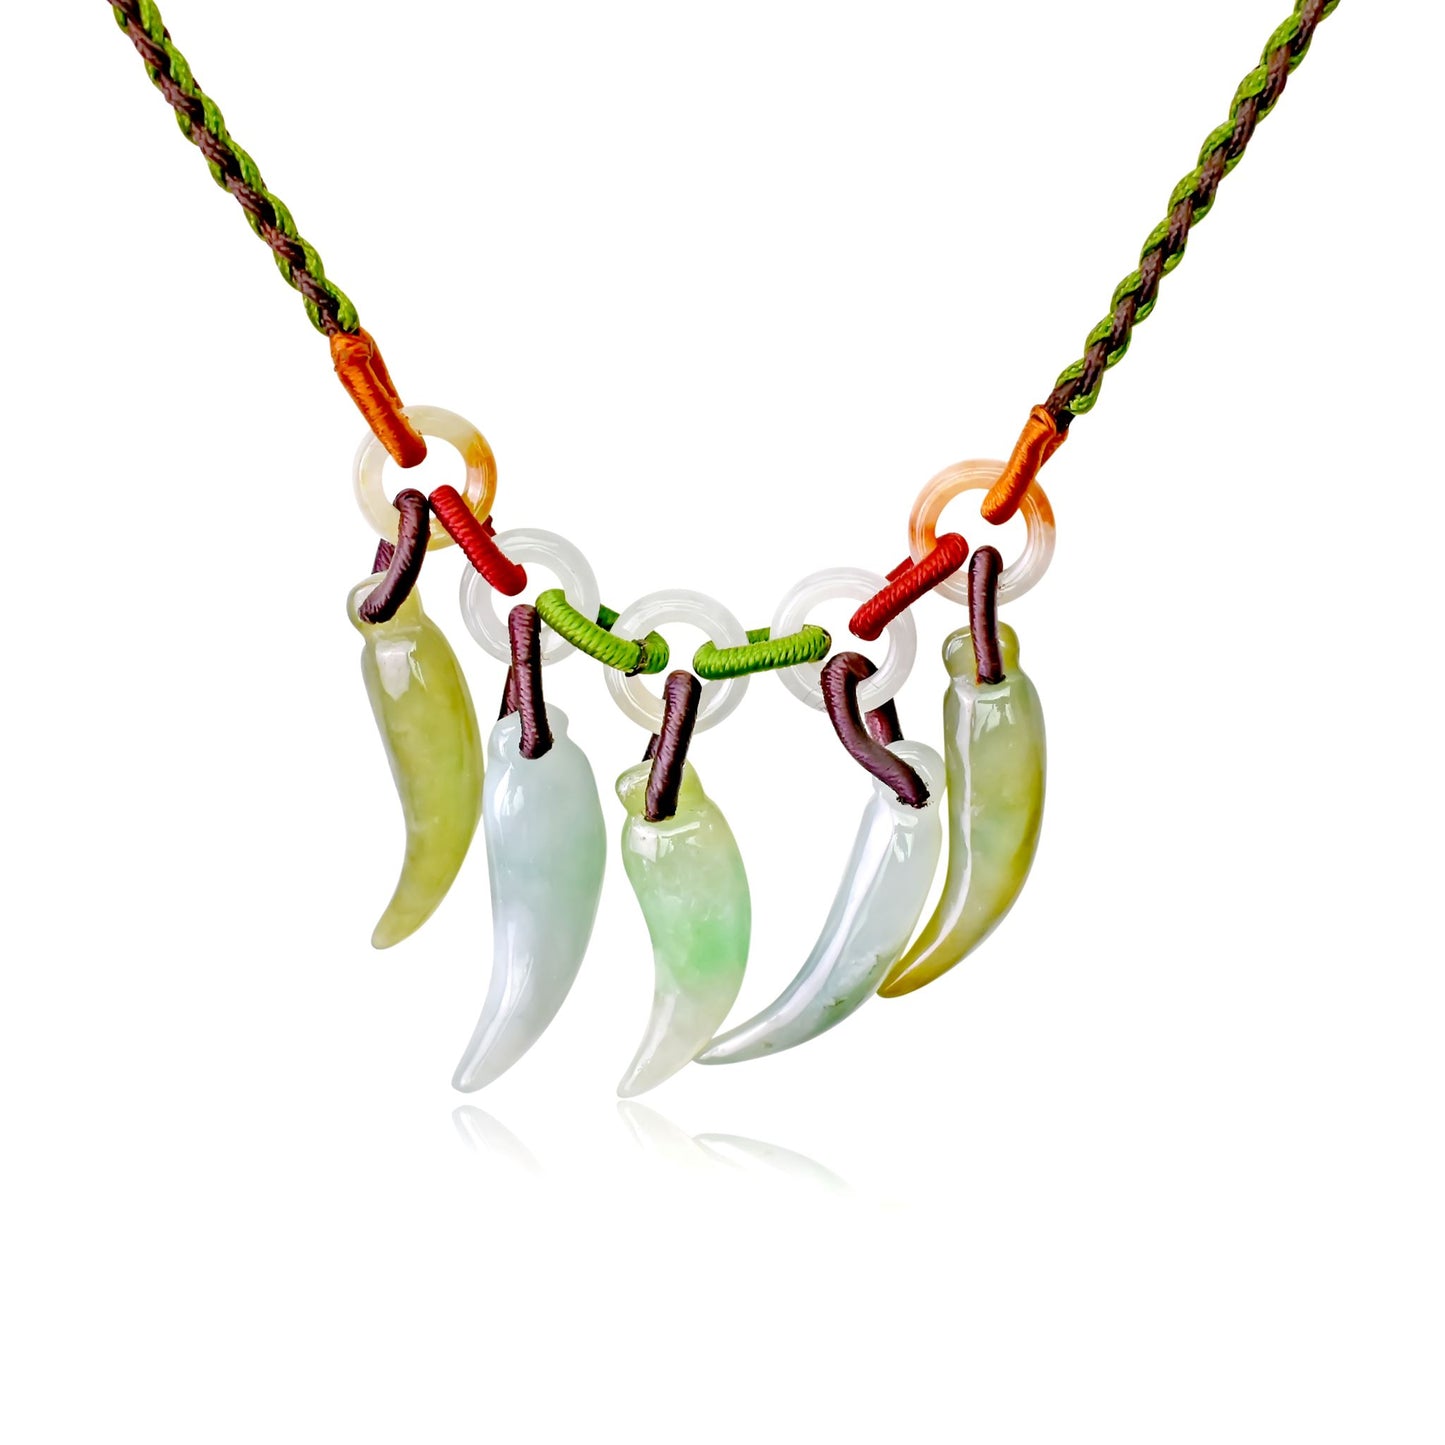 Spice your life with this Chili Handmade Jade Necklace